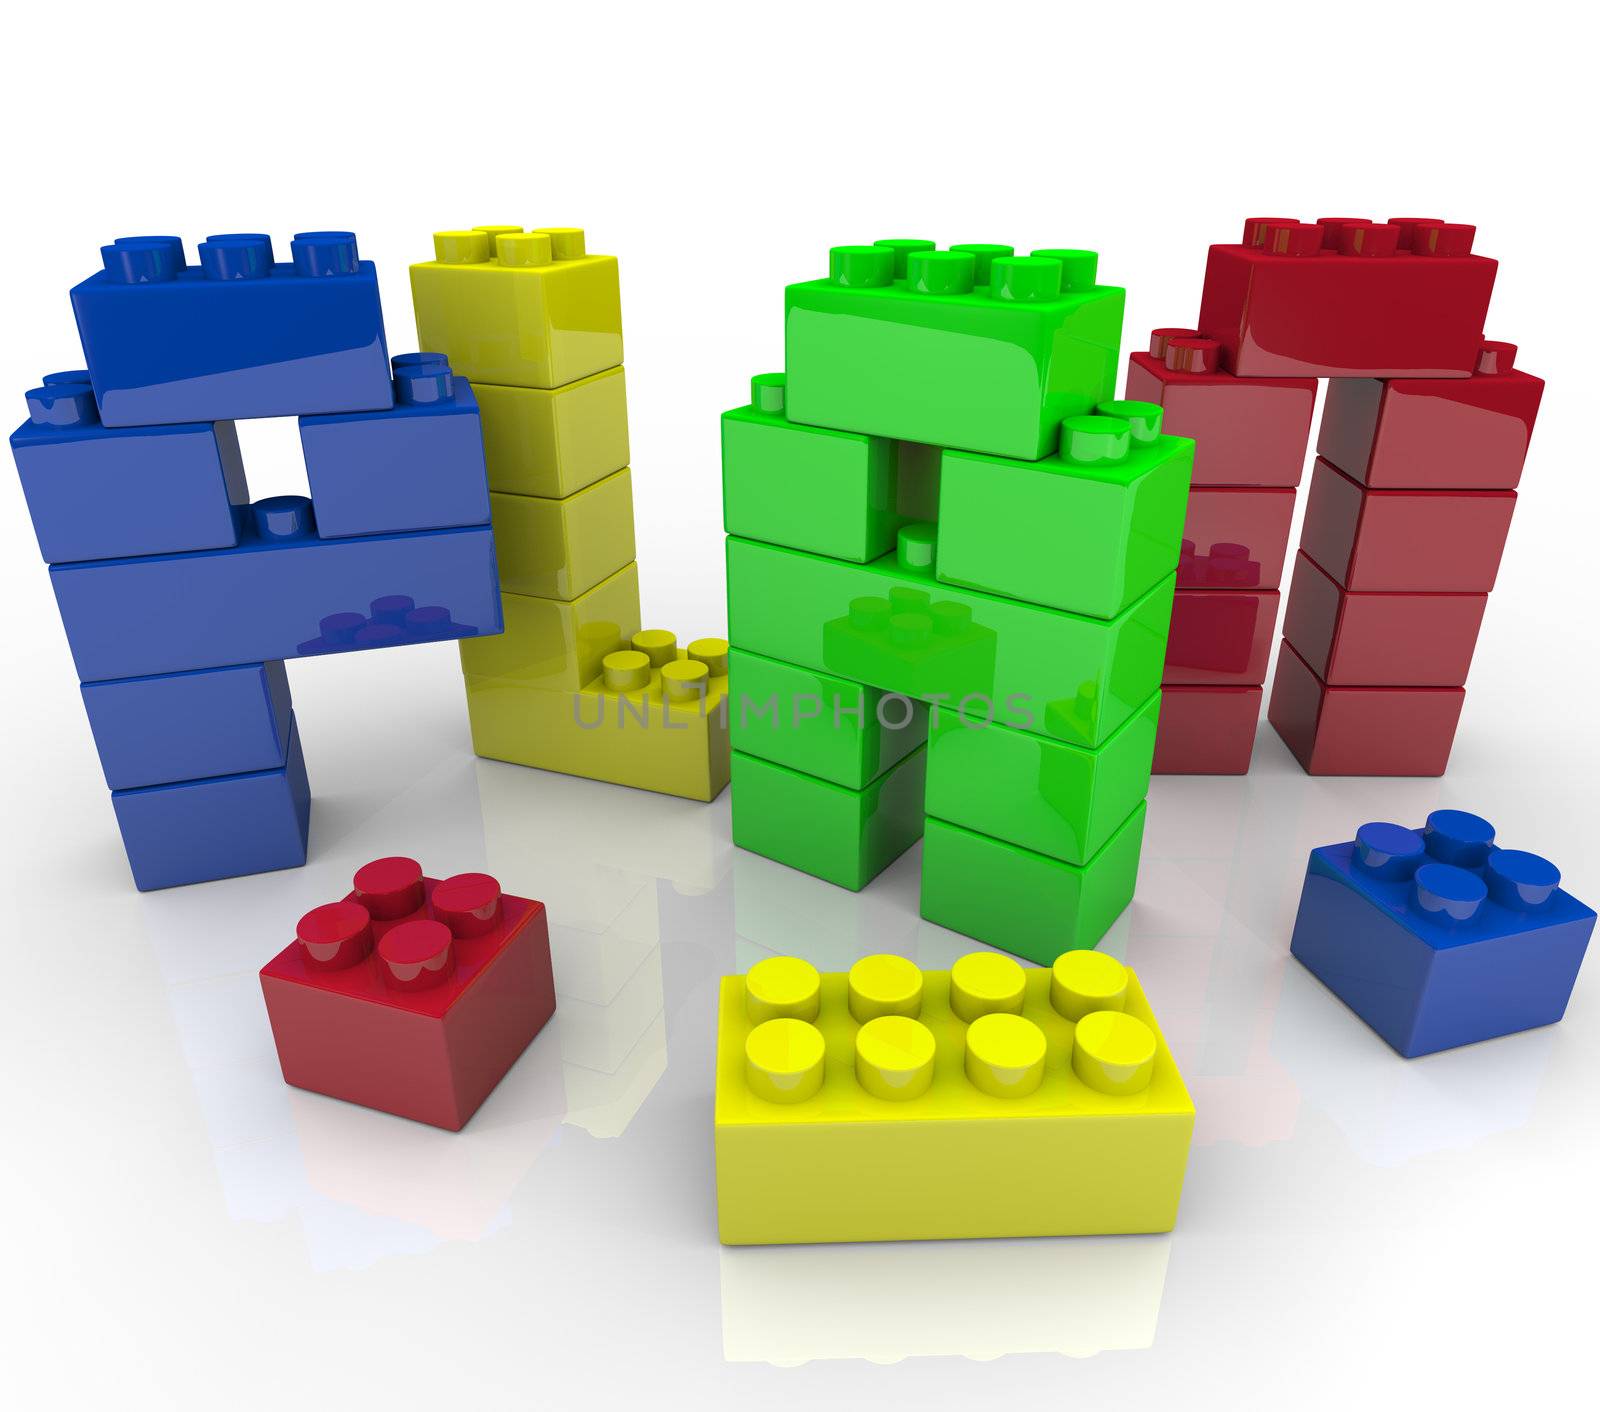 Plan Word Toy Building Blocks Building Strategy by iQoncept